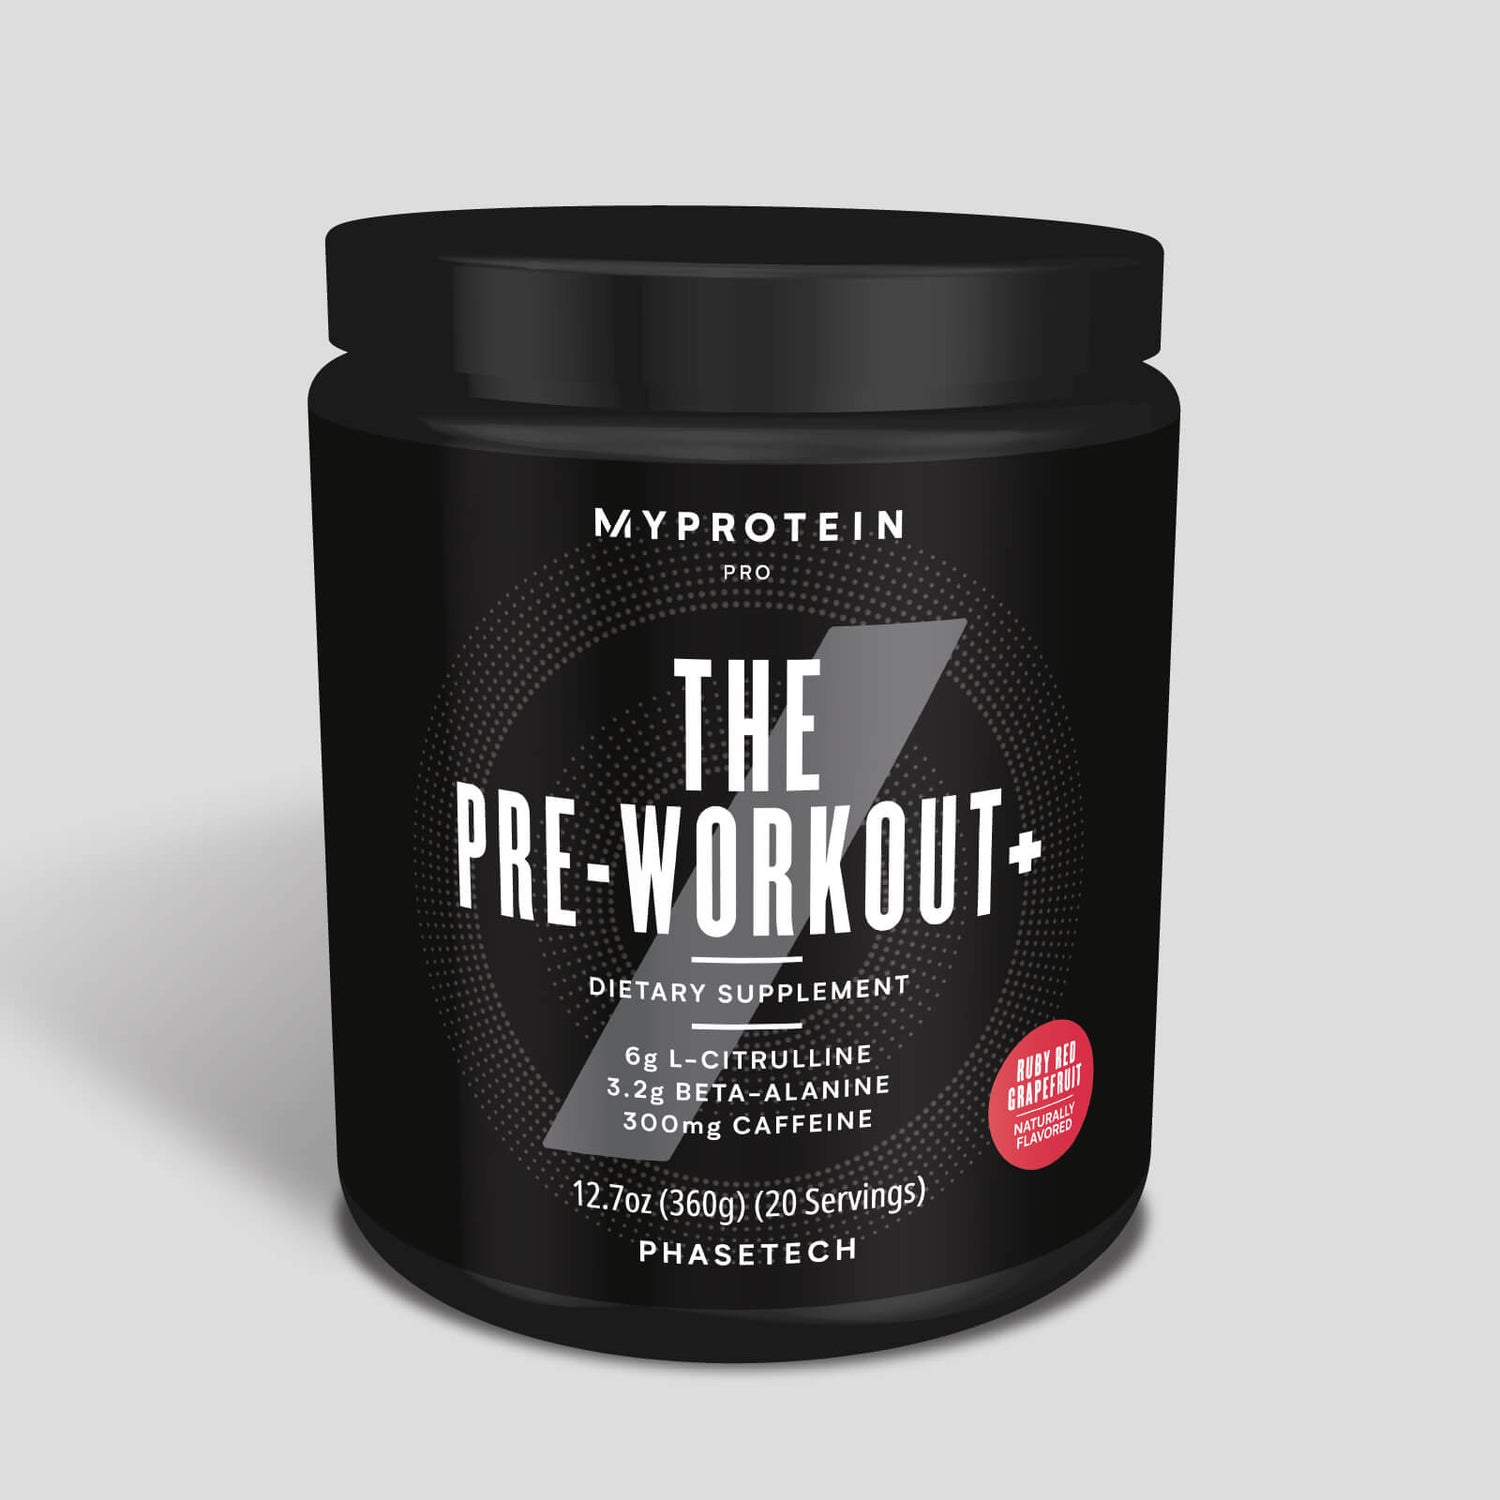 THE Pre-workout+ - Ruby Red Grapefruit